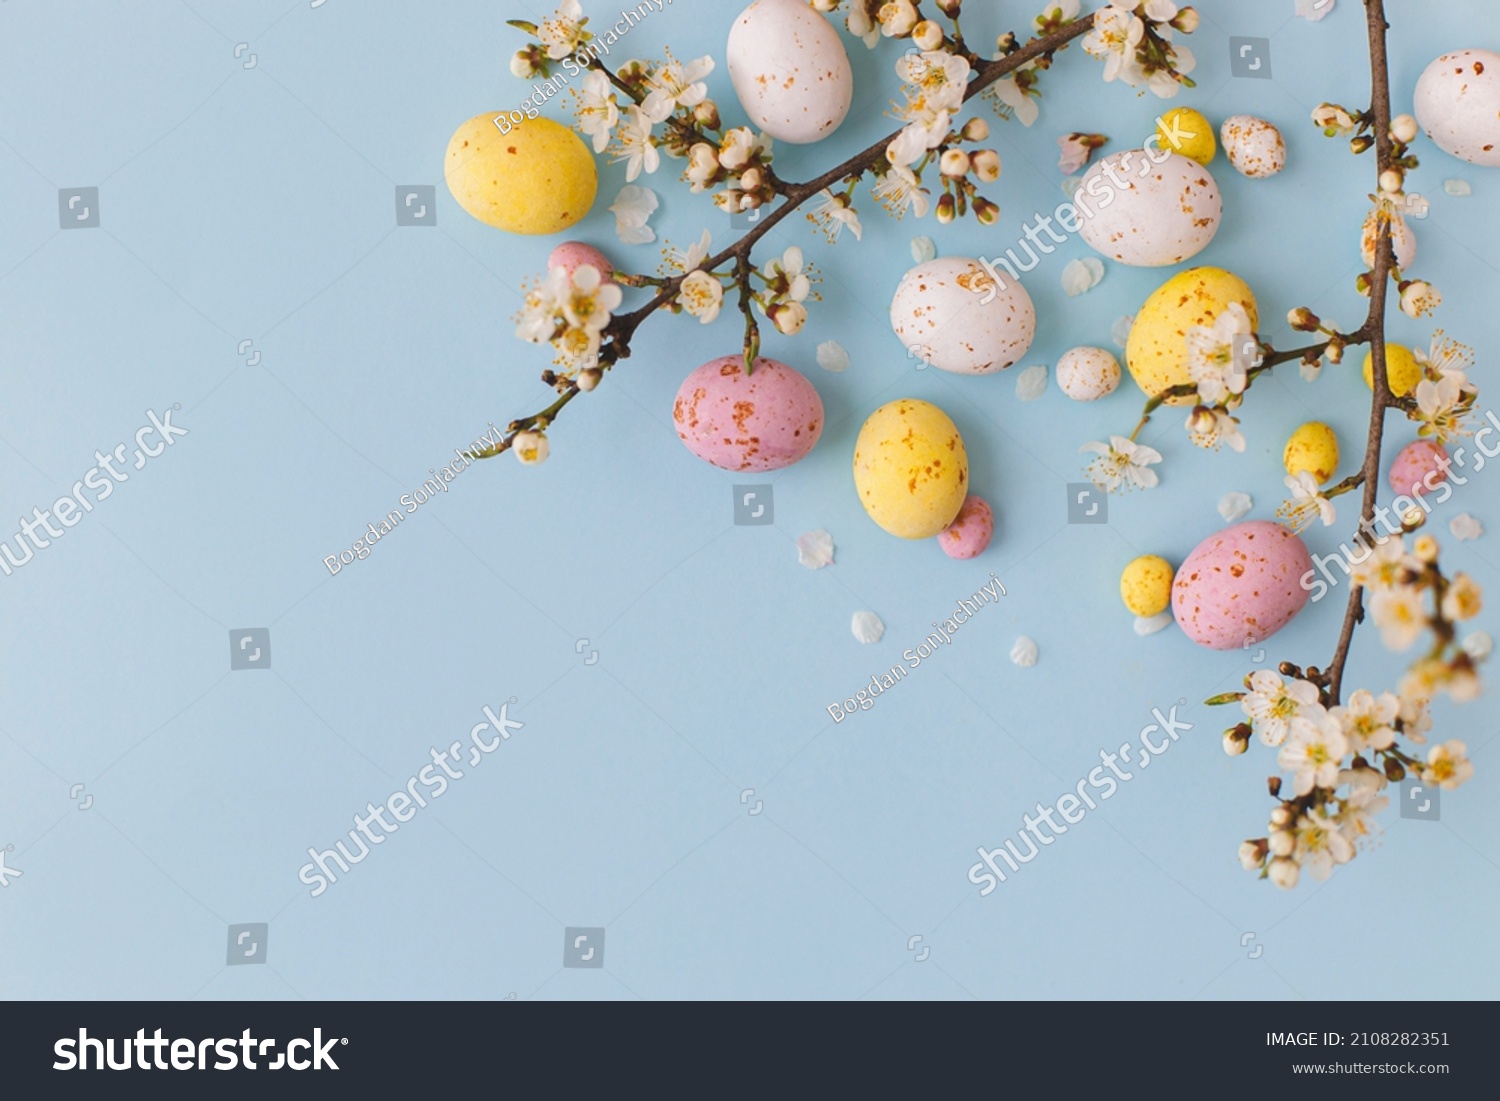 Happy Easter! Colorful Easter chocolate eggs with cherry blossoms flat lay on blue background. Stylish tender spring template with space for text. Greeting card or banner #2108282351